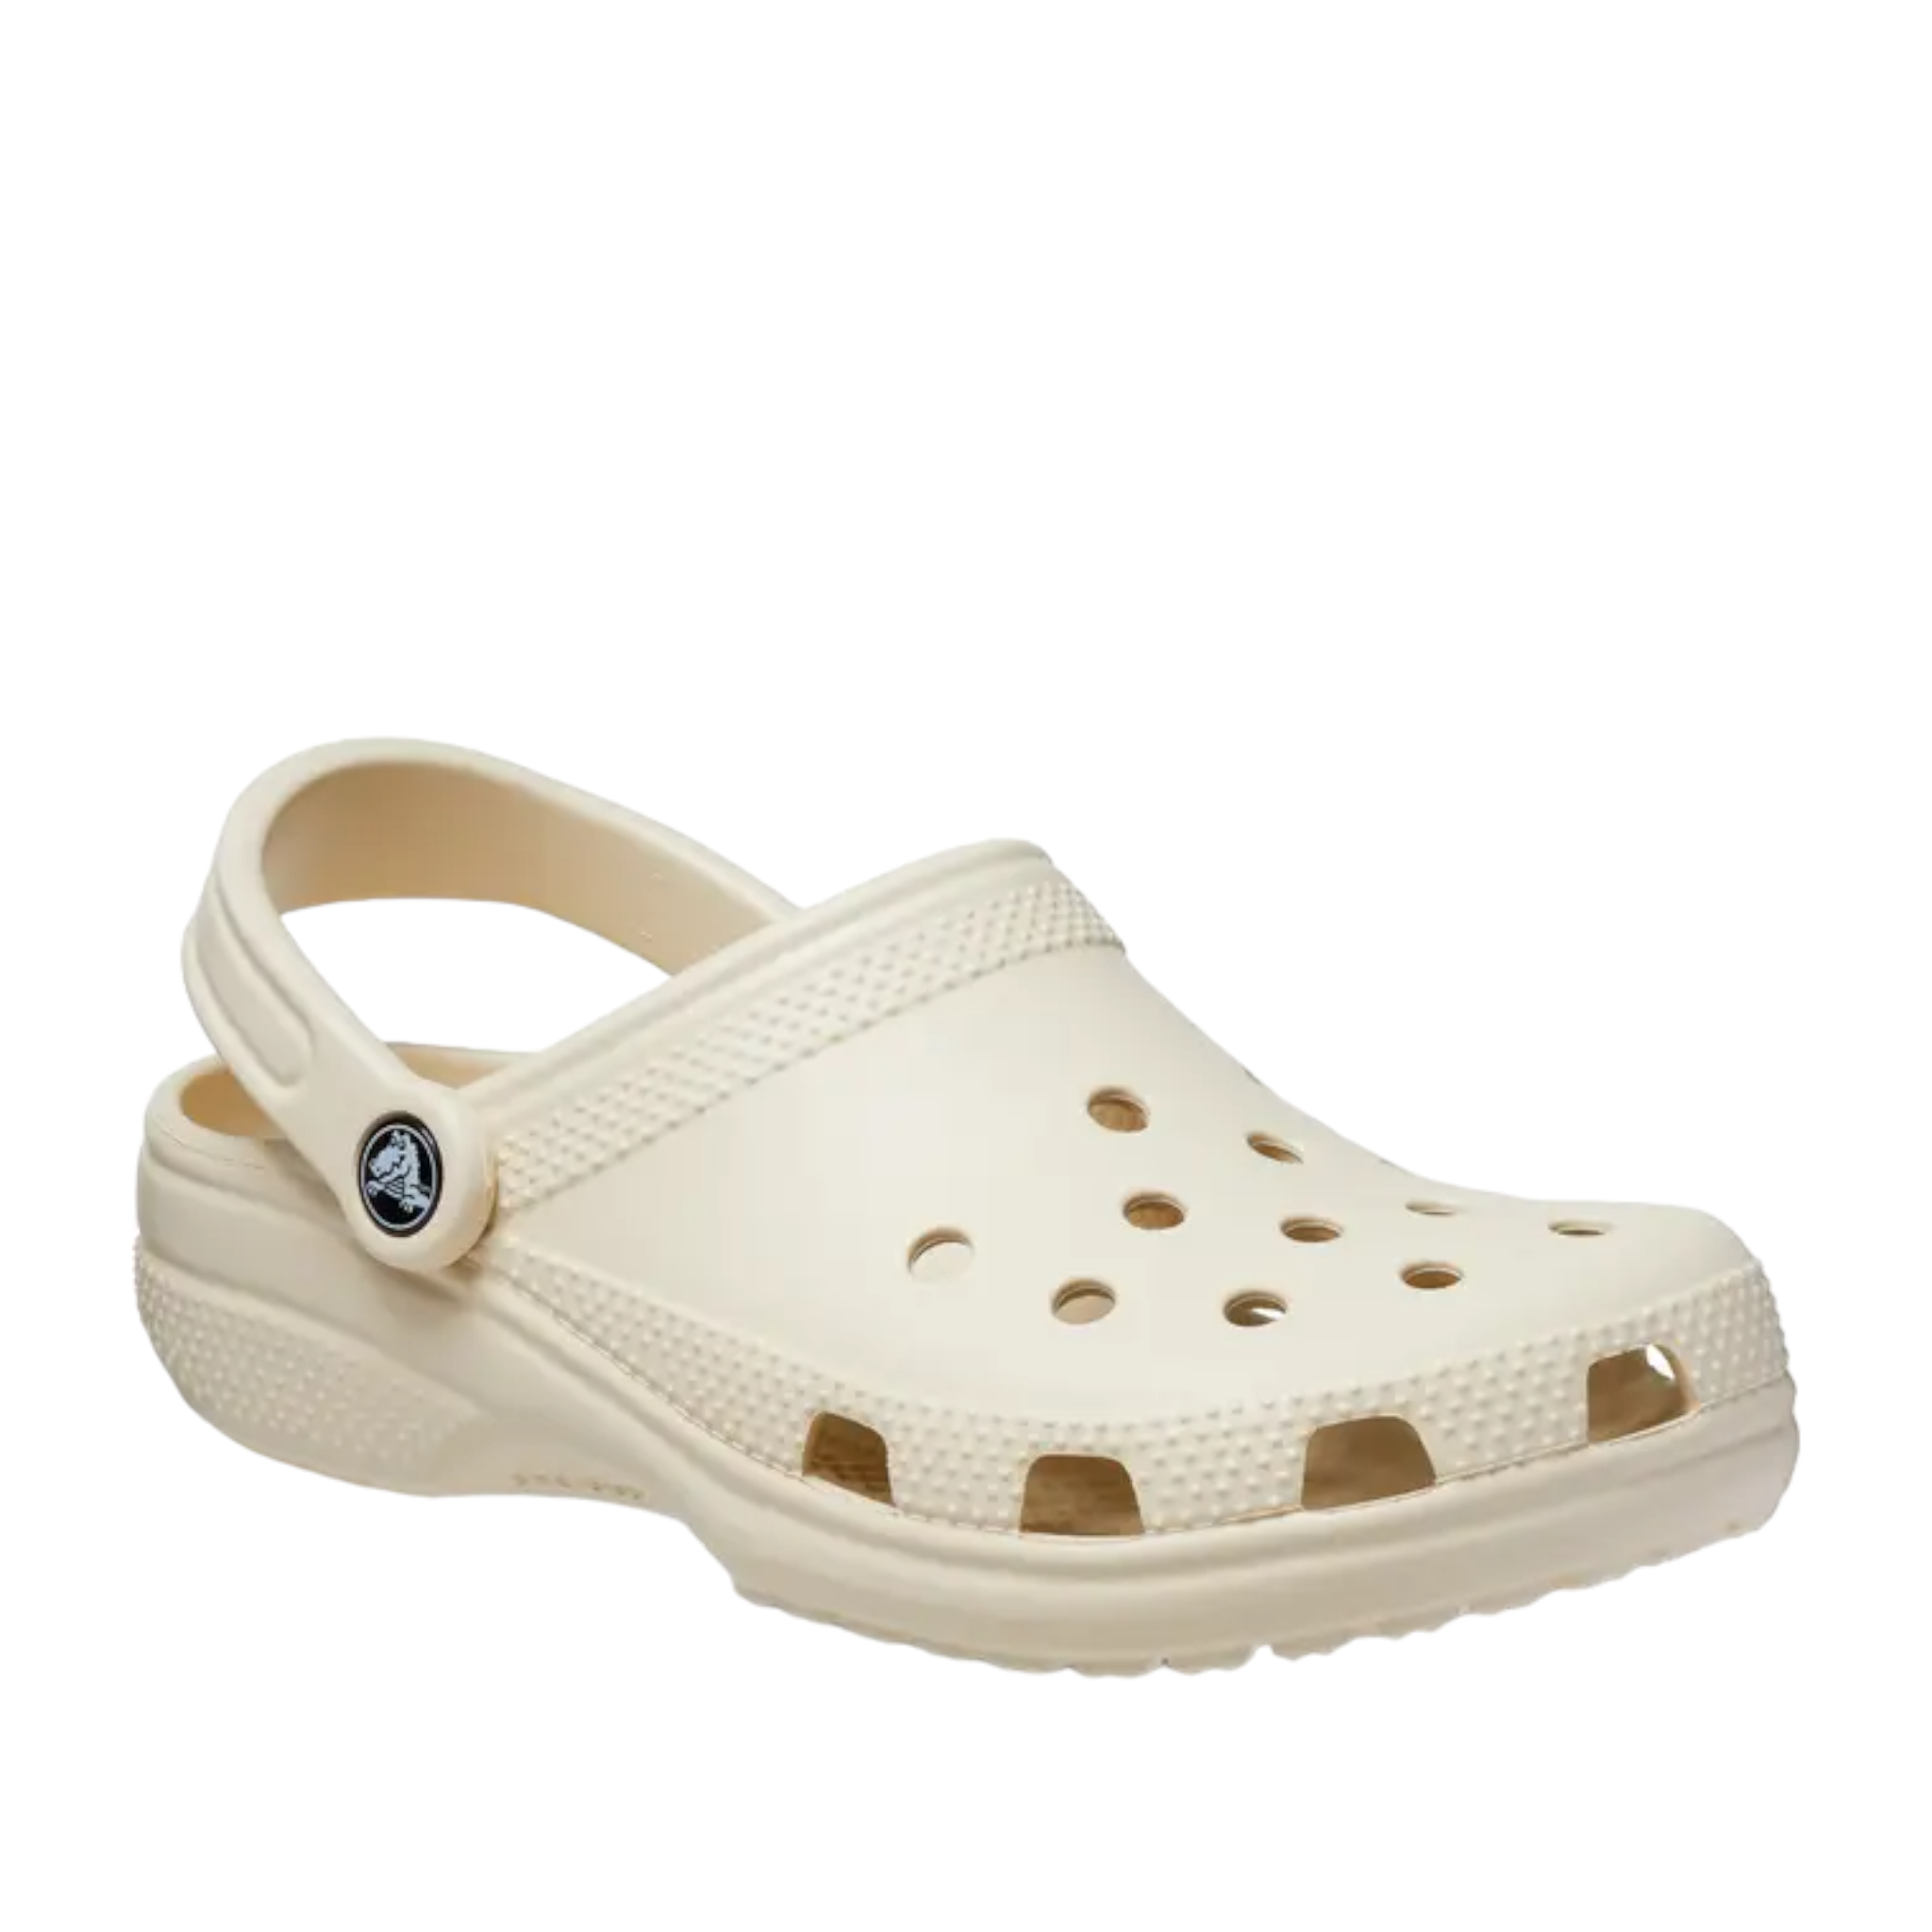 Crocs Classic Clogs online and instore with shoe&amp;me Mount Maunganui. Shop Bone Clogs